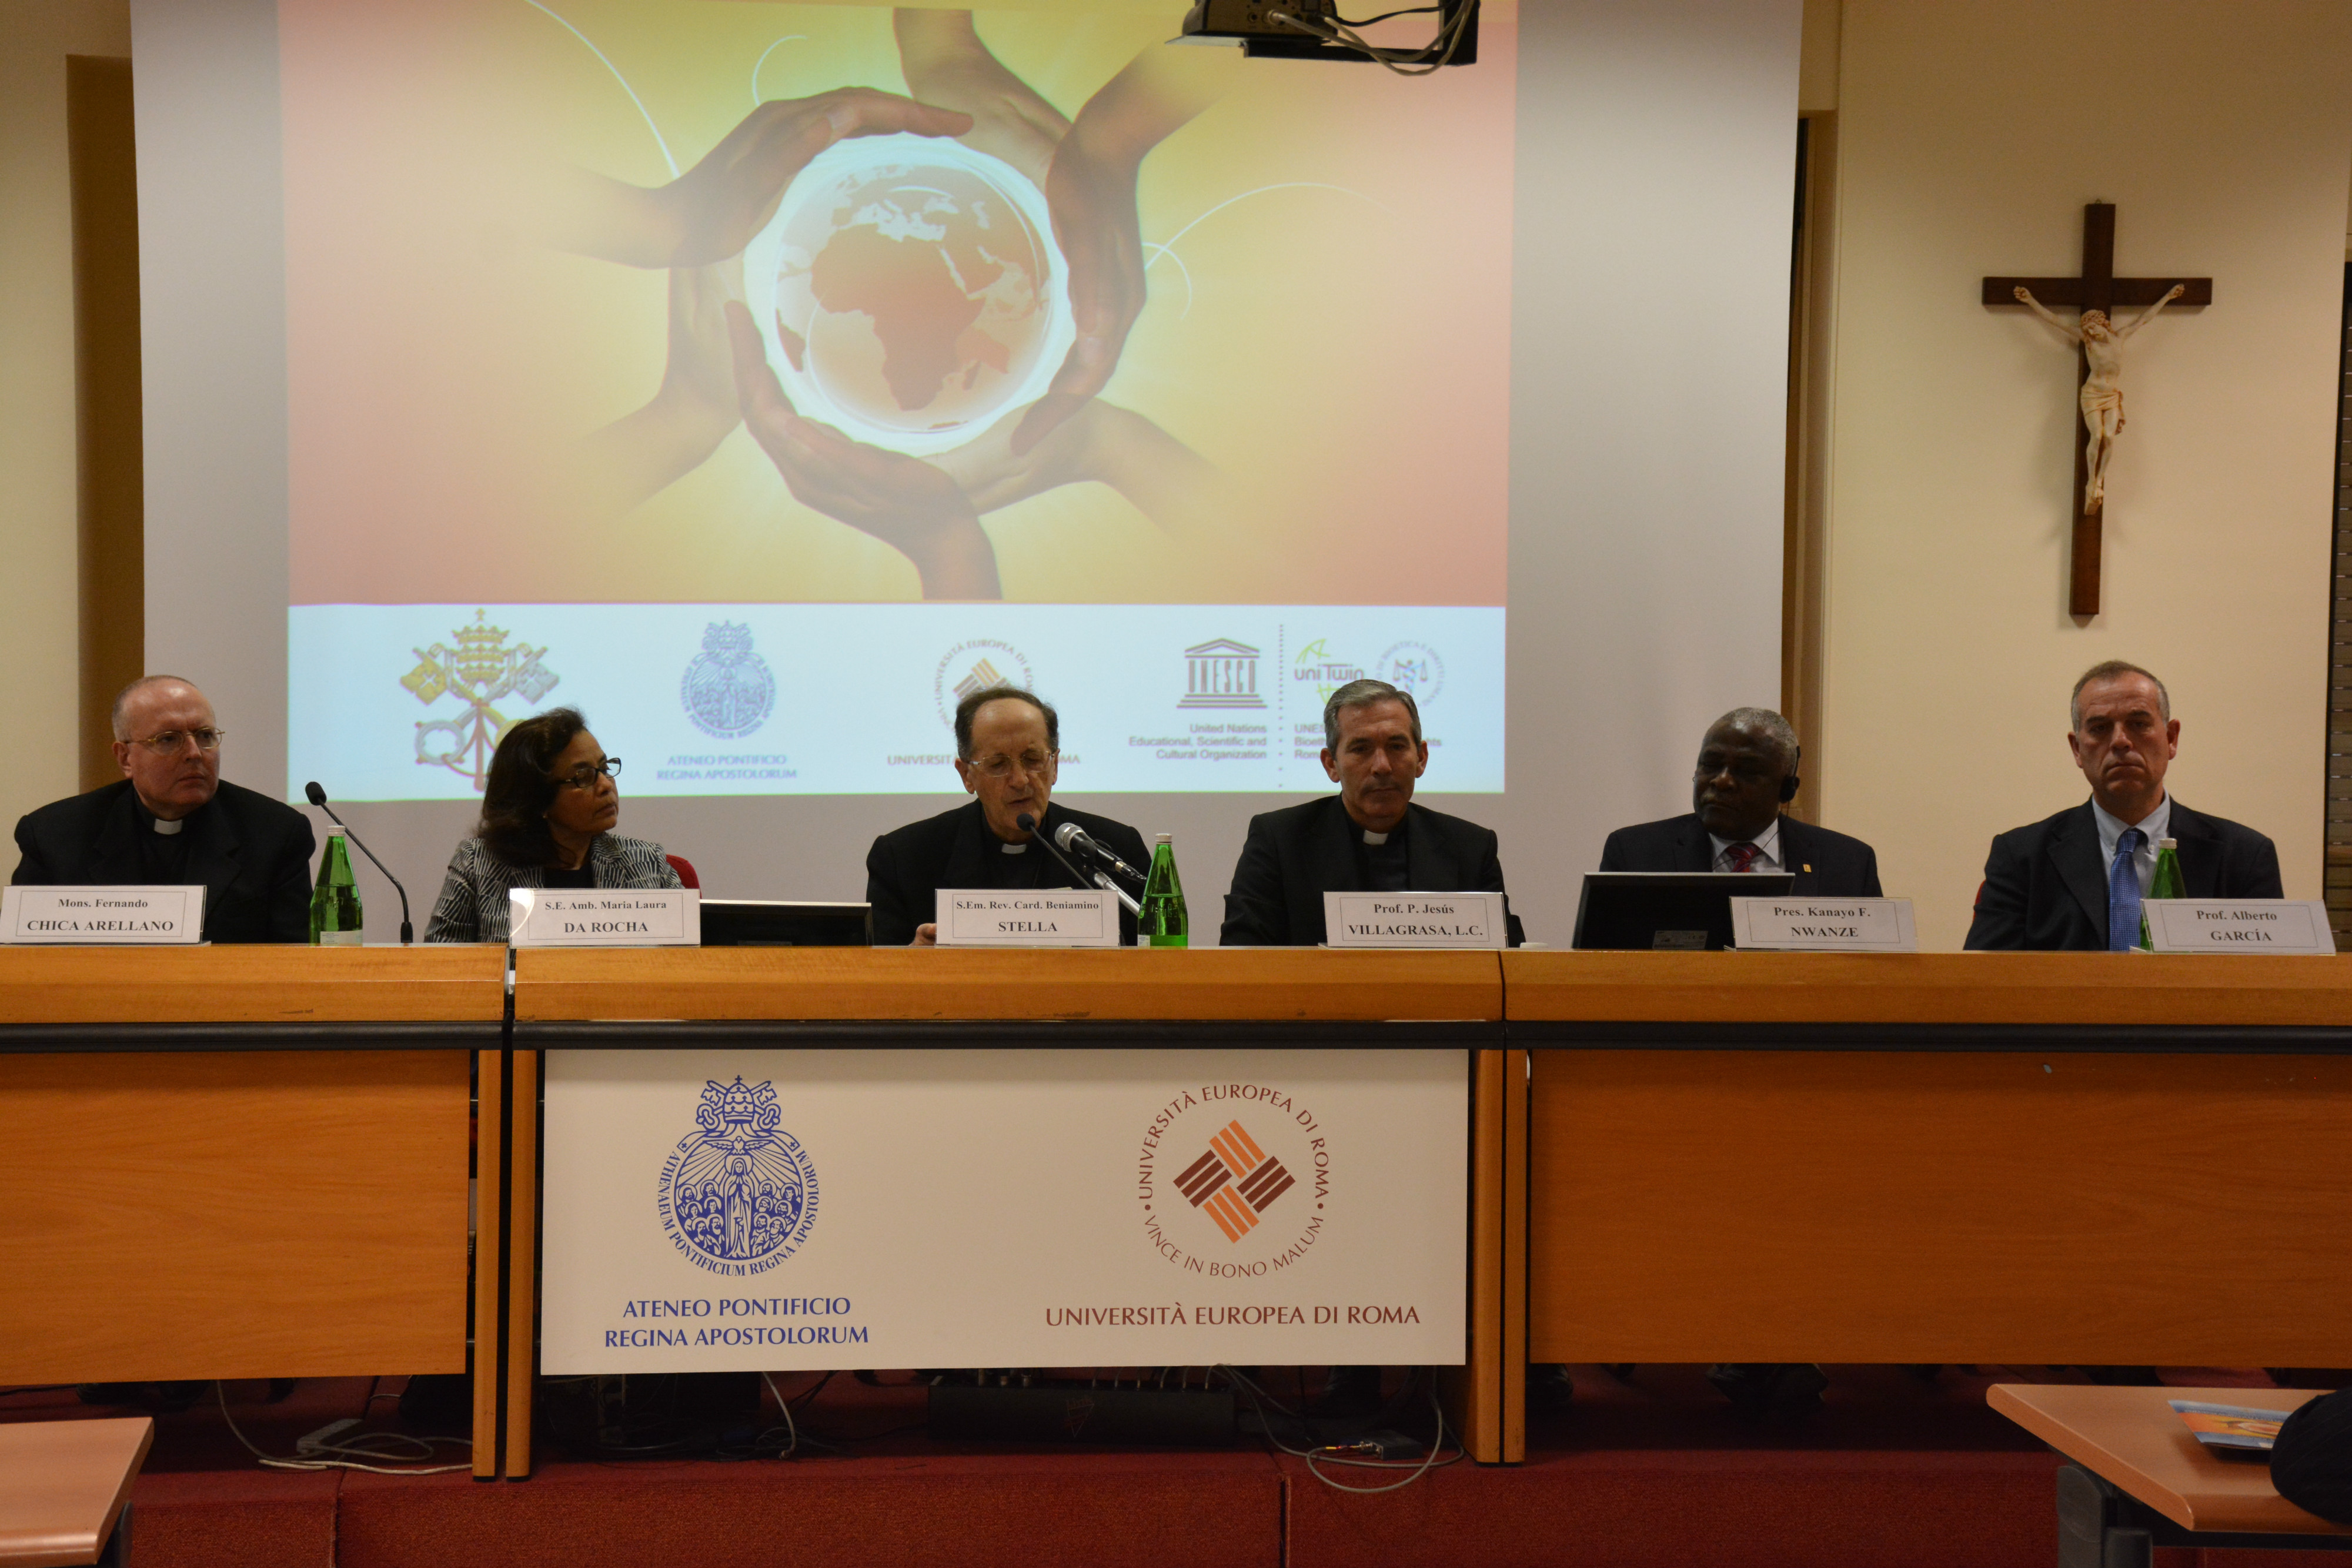 Congress about Laudato Si' in European University of Rome